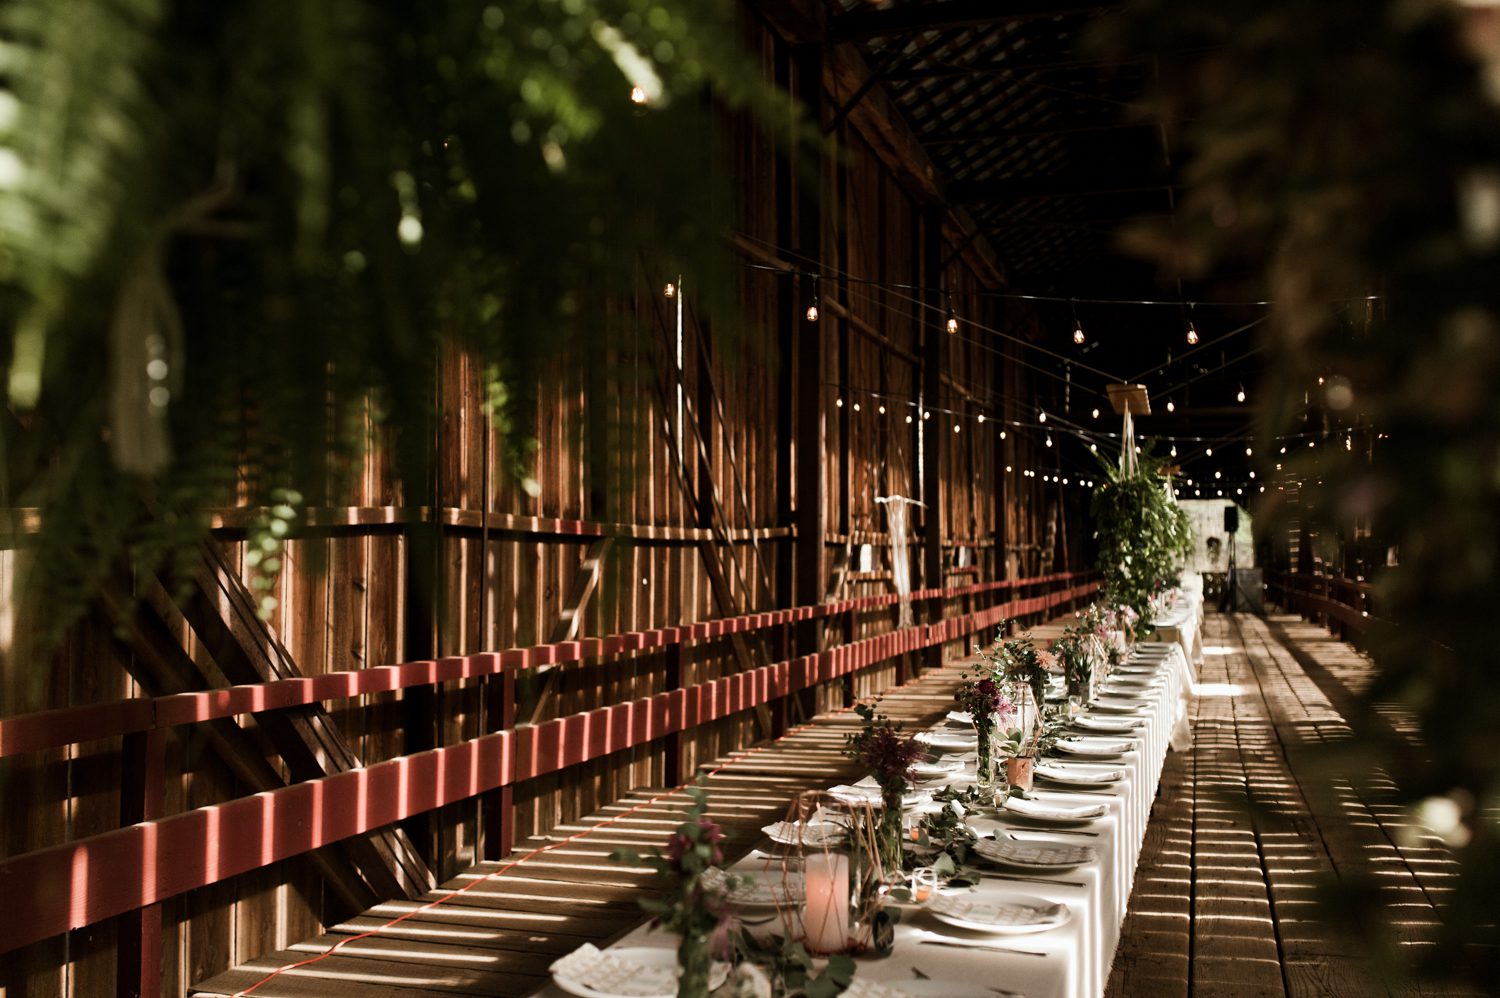 The dinner table of a bohemian wedding. By West Coast wedding photographer Briana Morrison